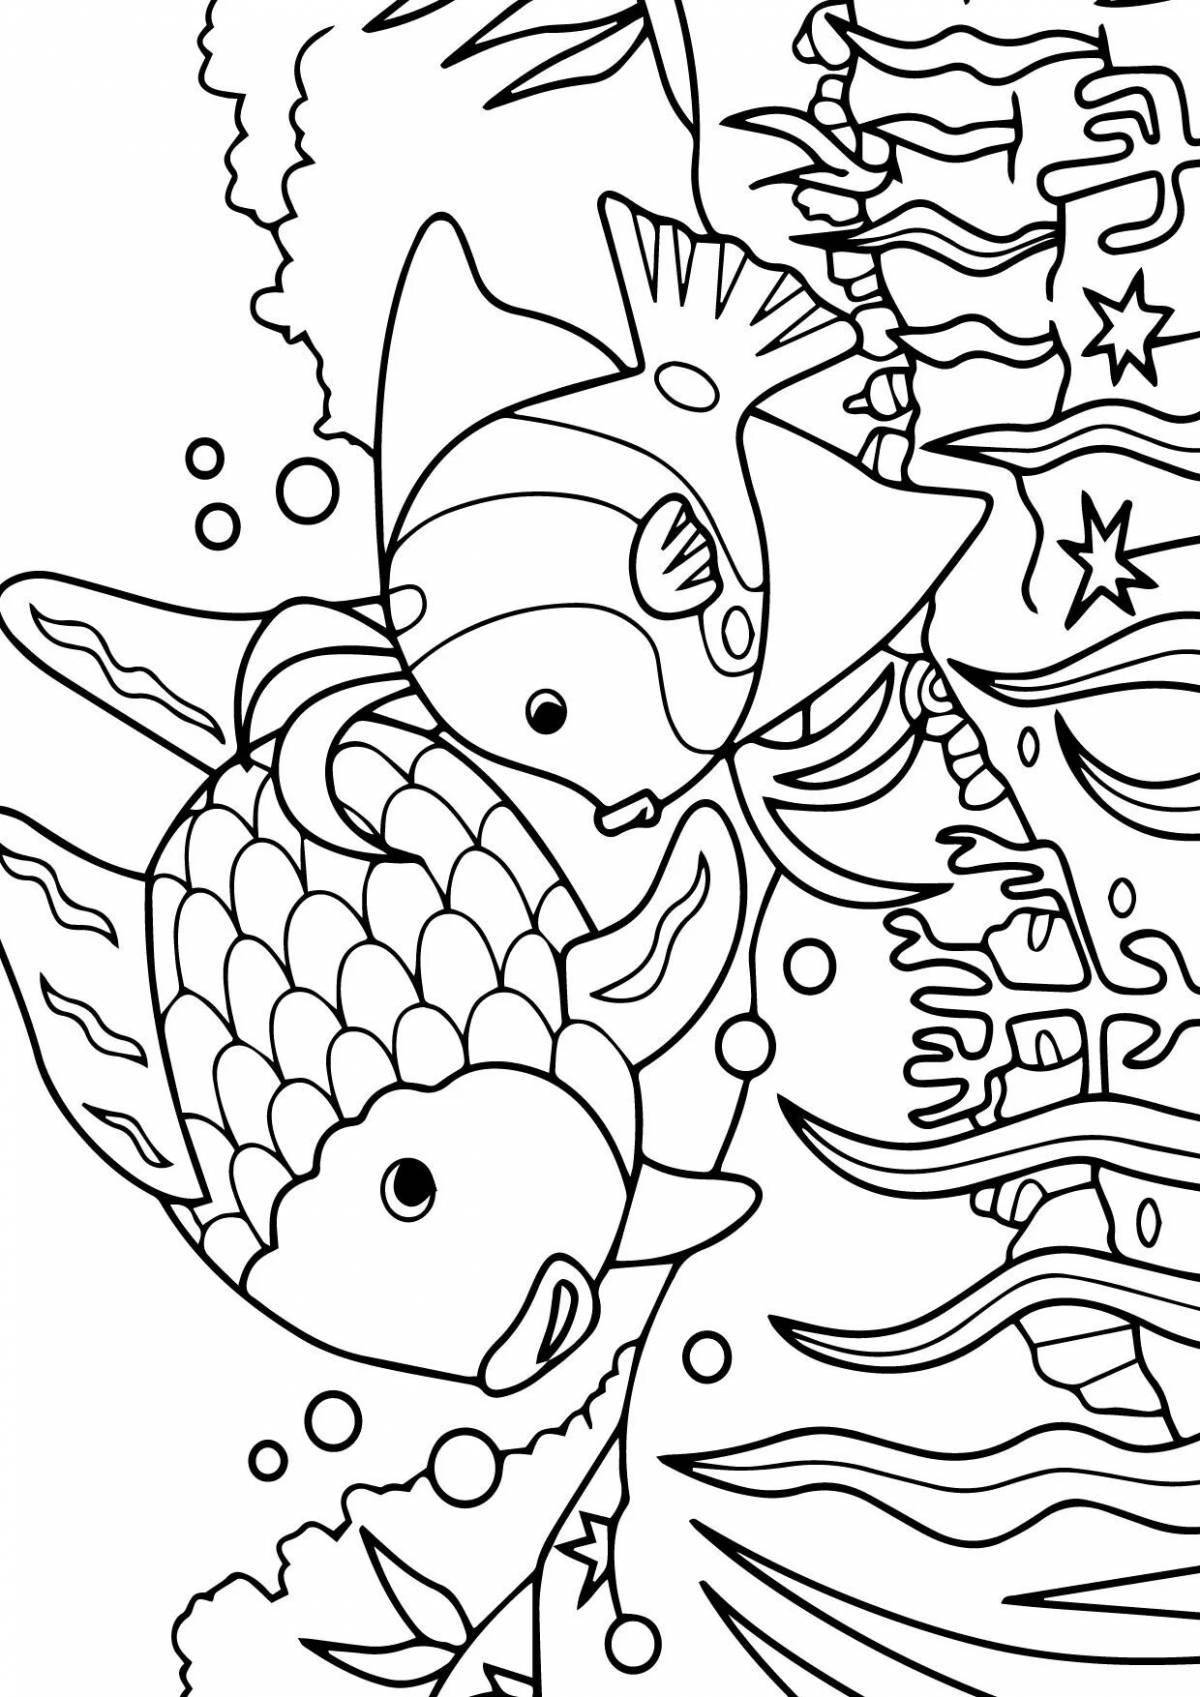 Mystical fish coloring by numbers